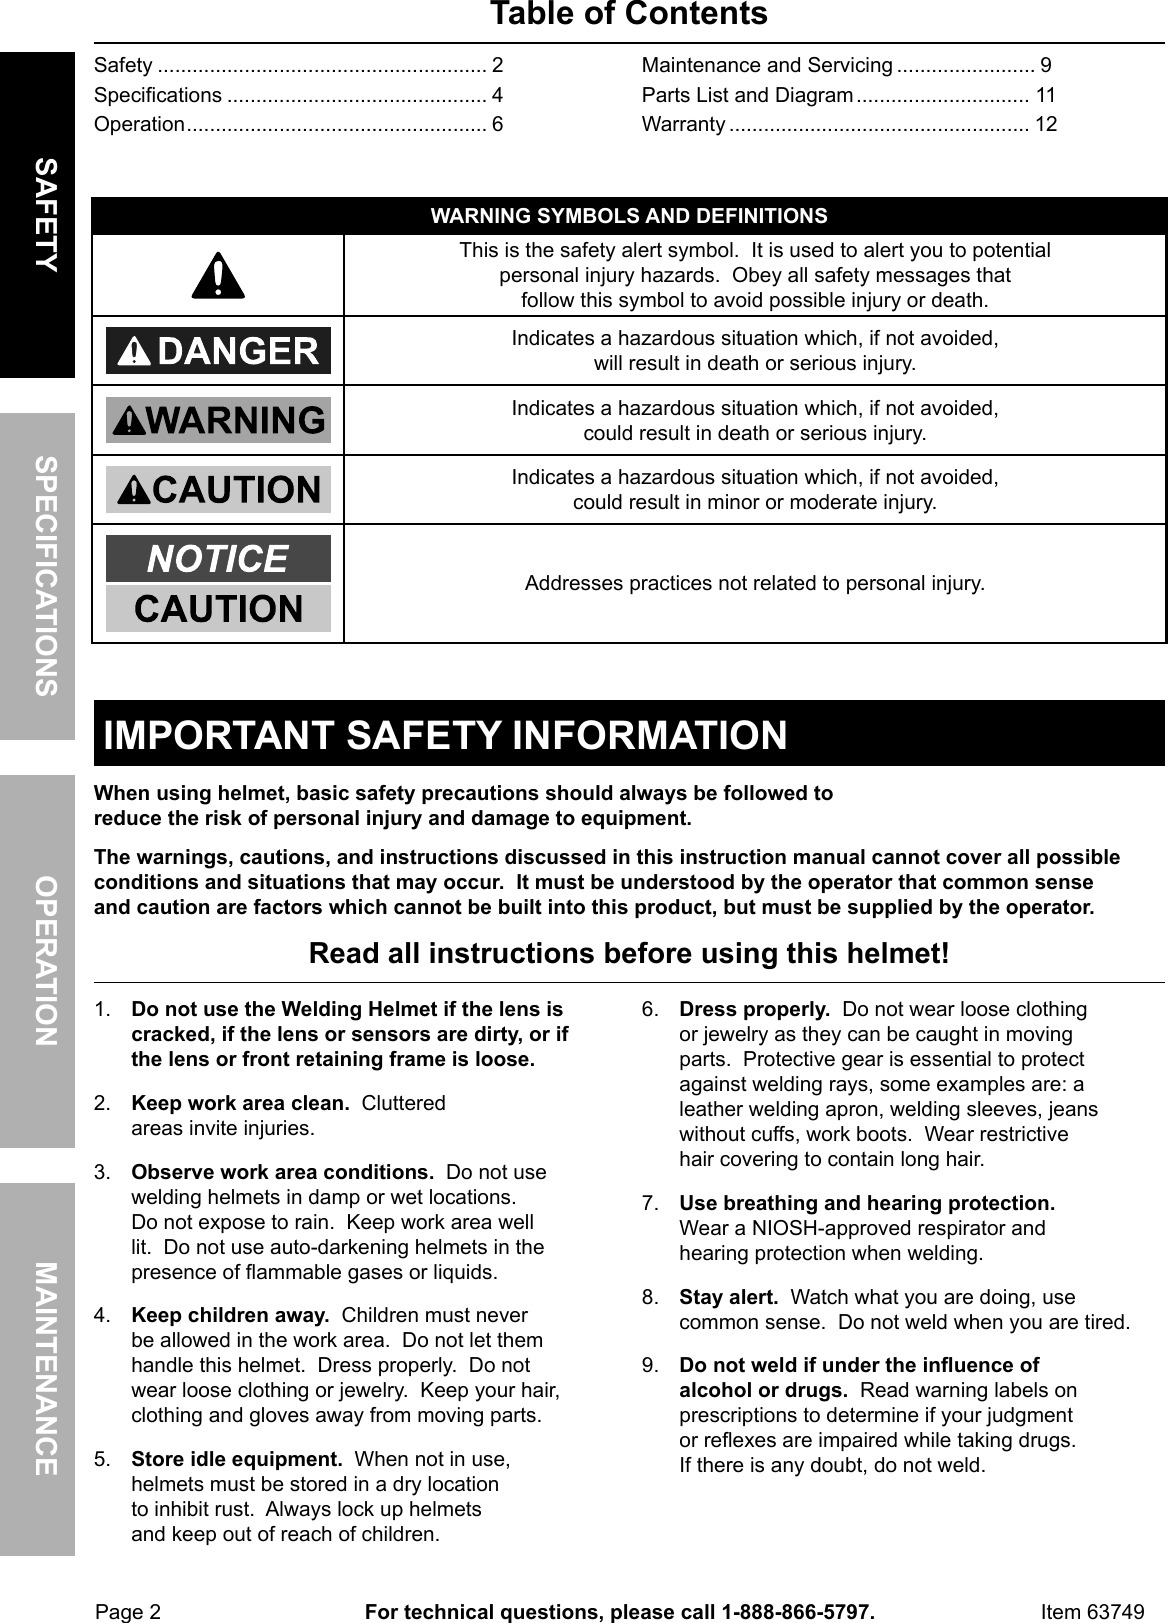 Page 2 of 12 - Manual For The 63749 Arc Safe™ Auto Darkening Welding Helmet